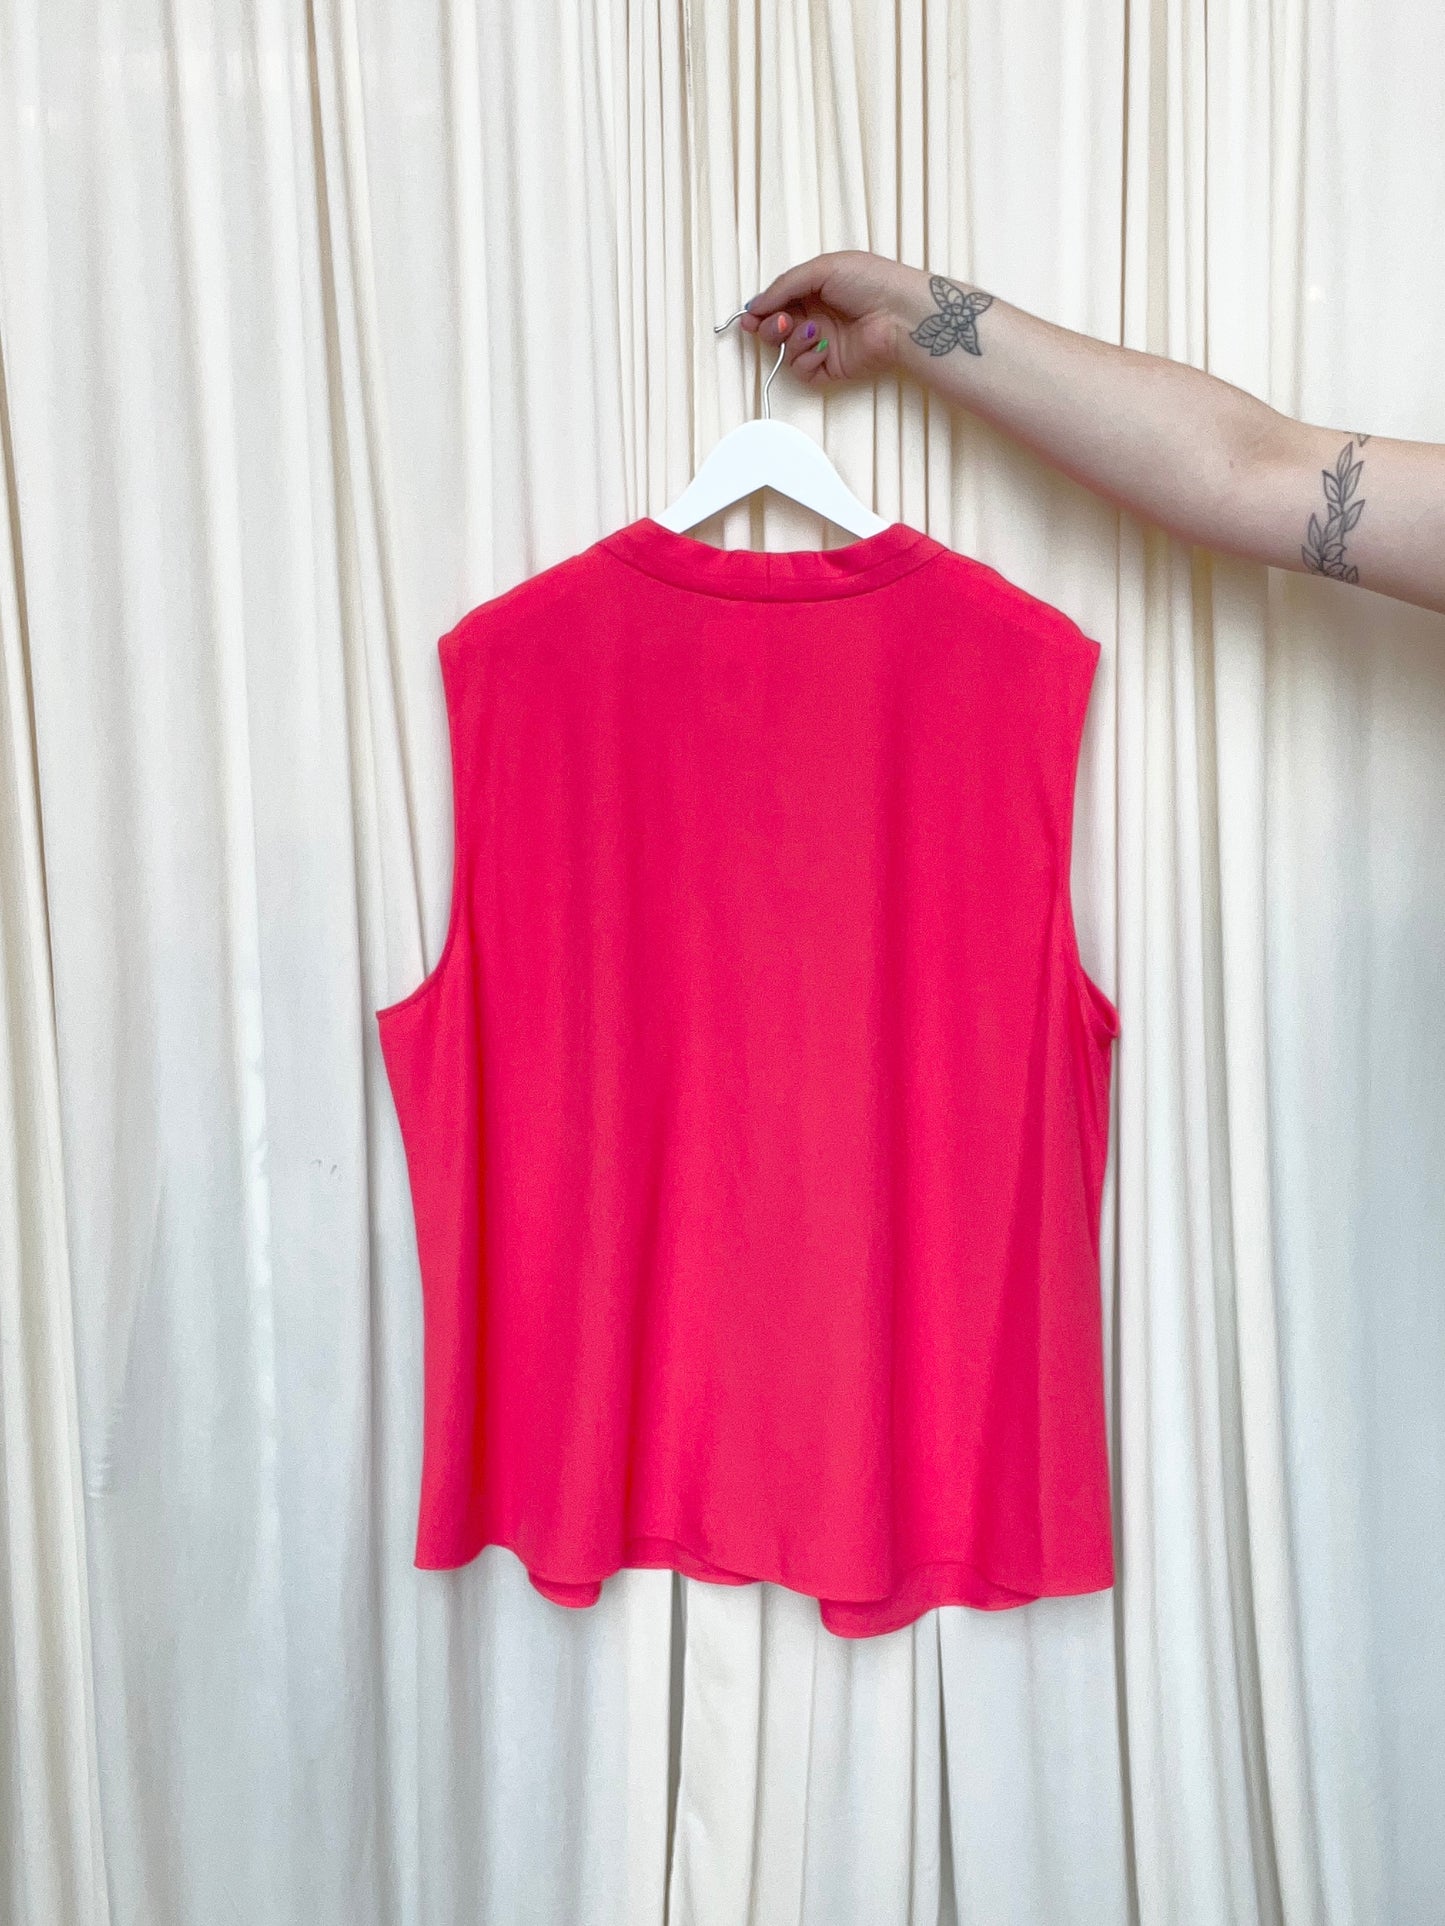 NWT Coral Tank Blouse - 3X-Large